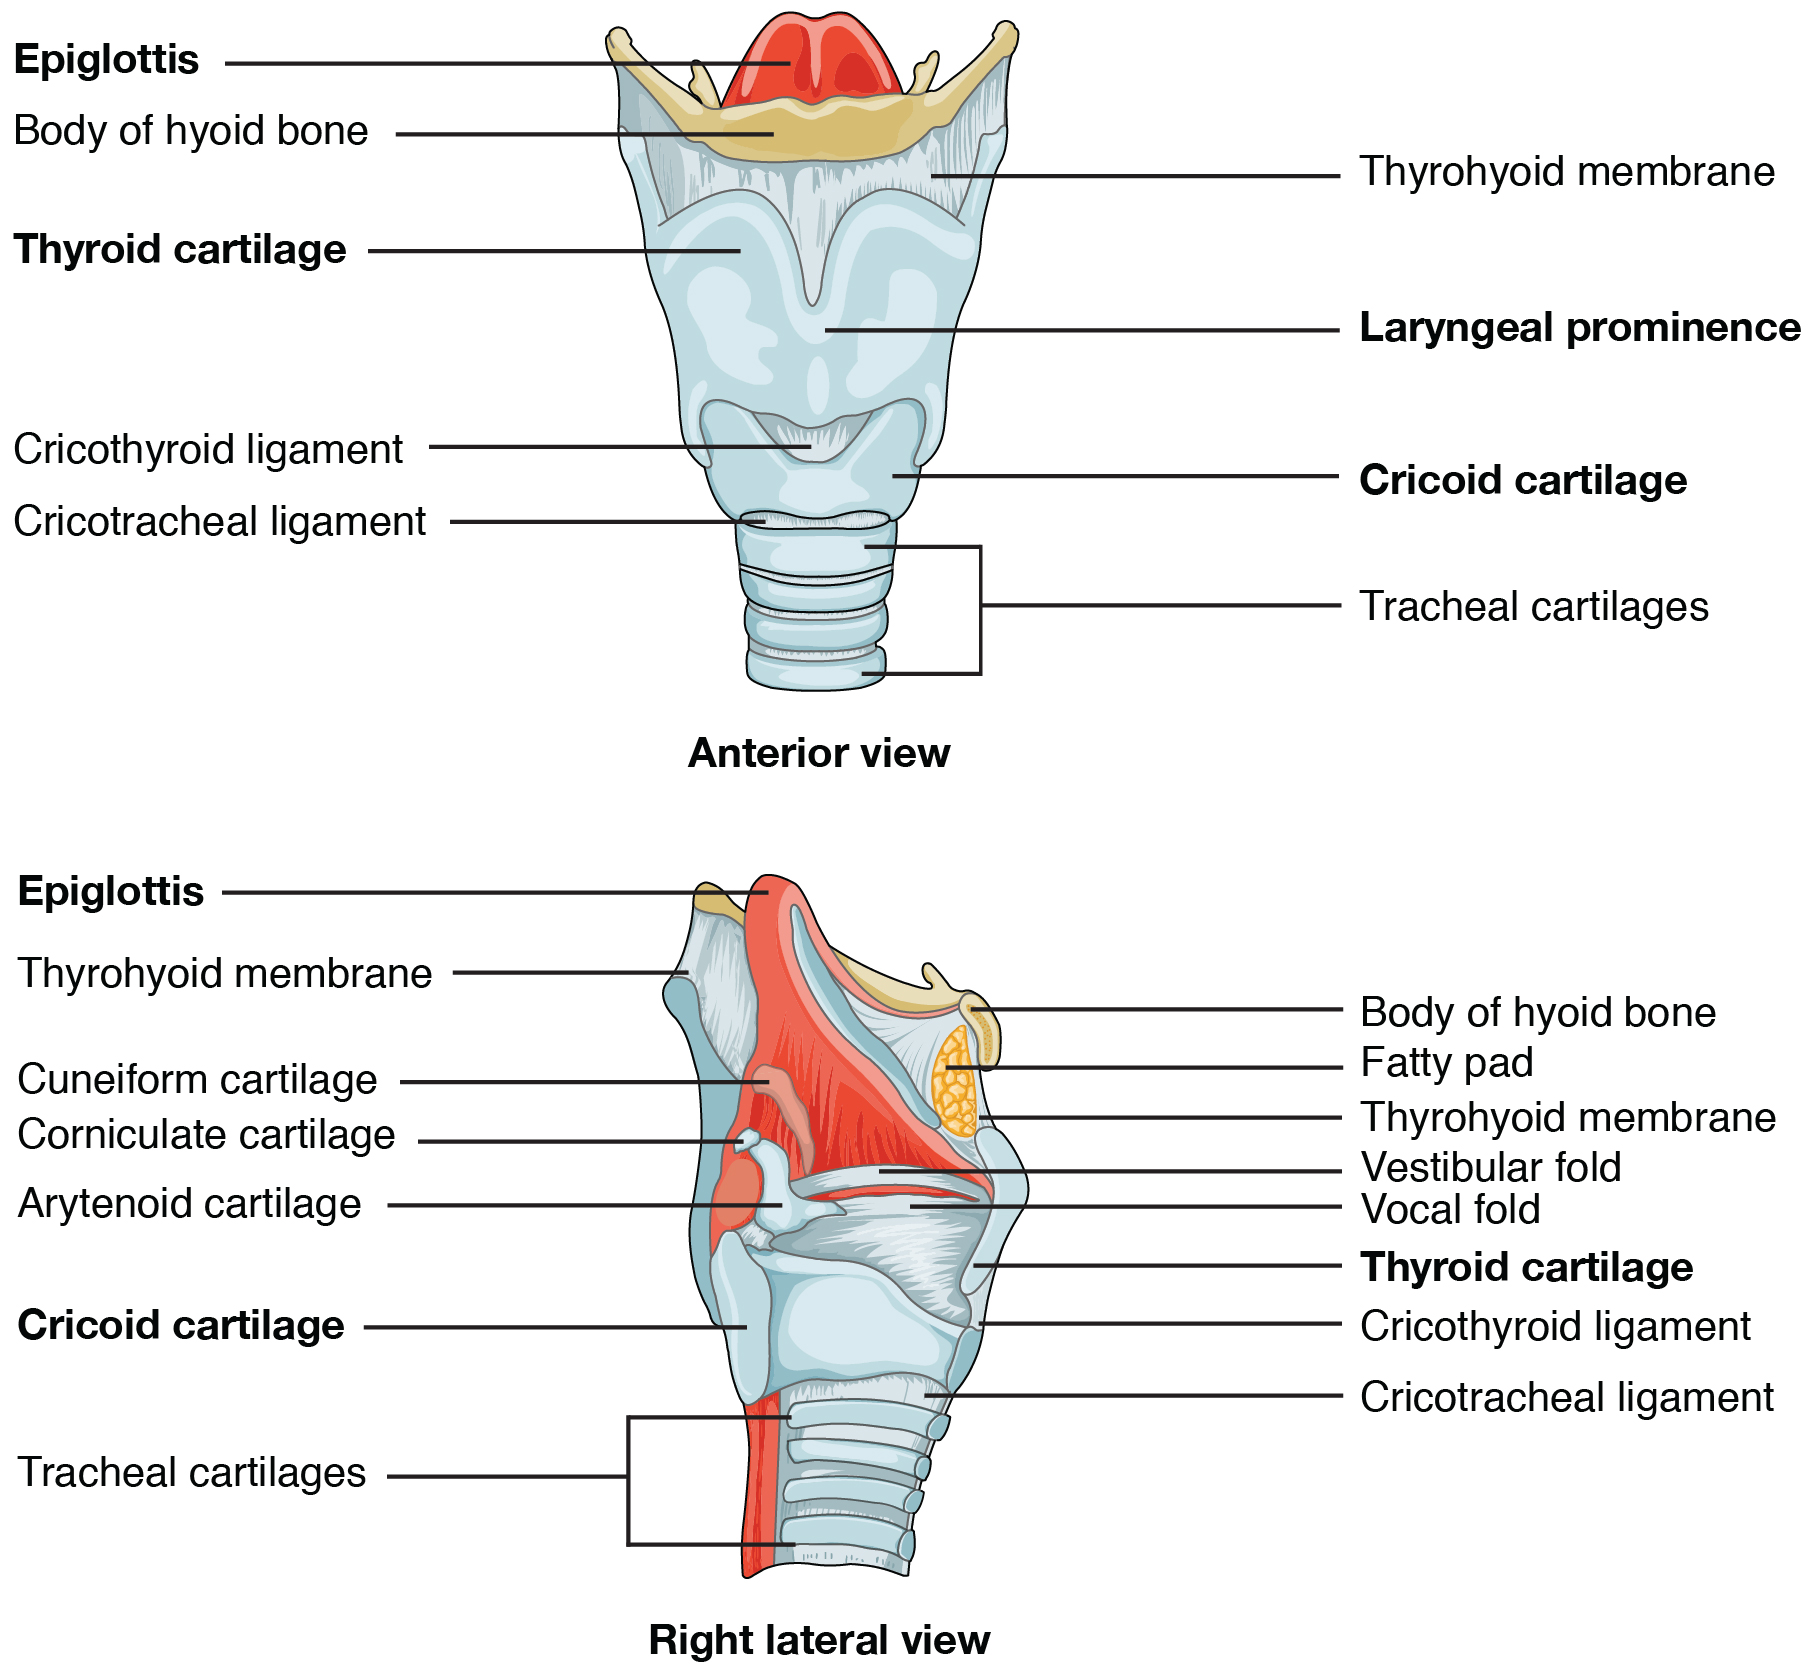 Anterior and right lateral view of the larynx. Image description available.